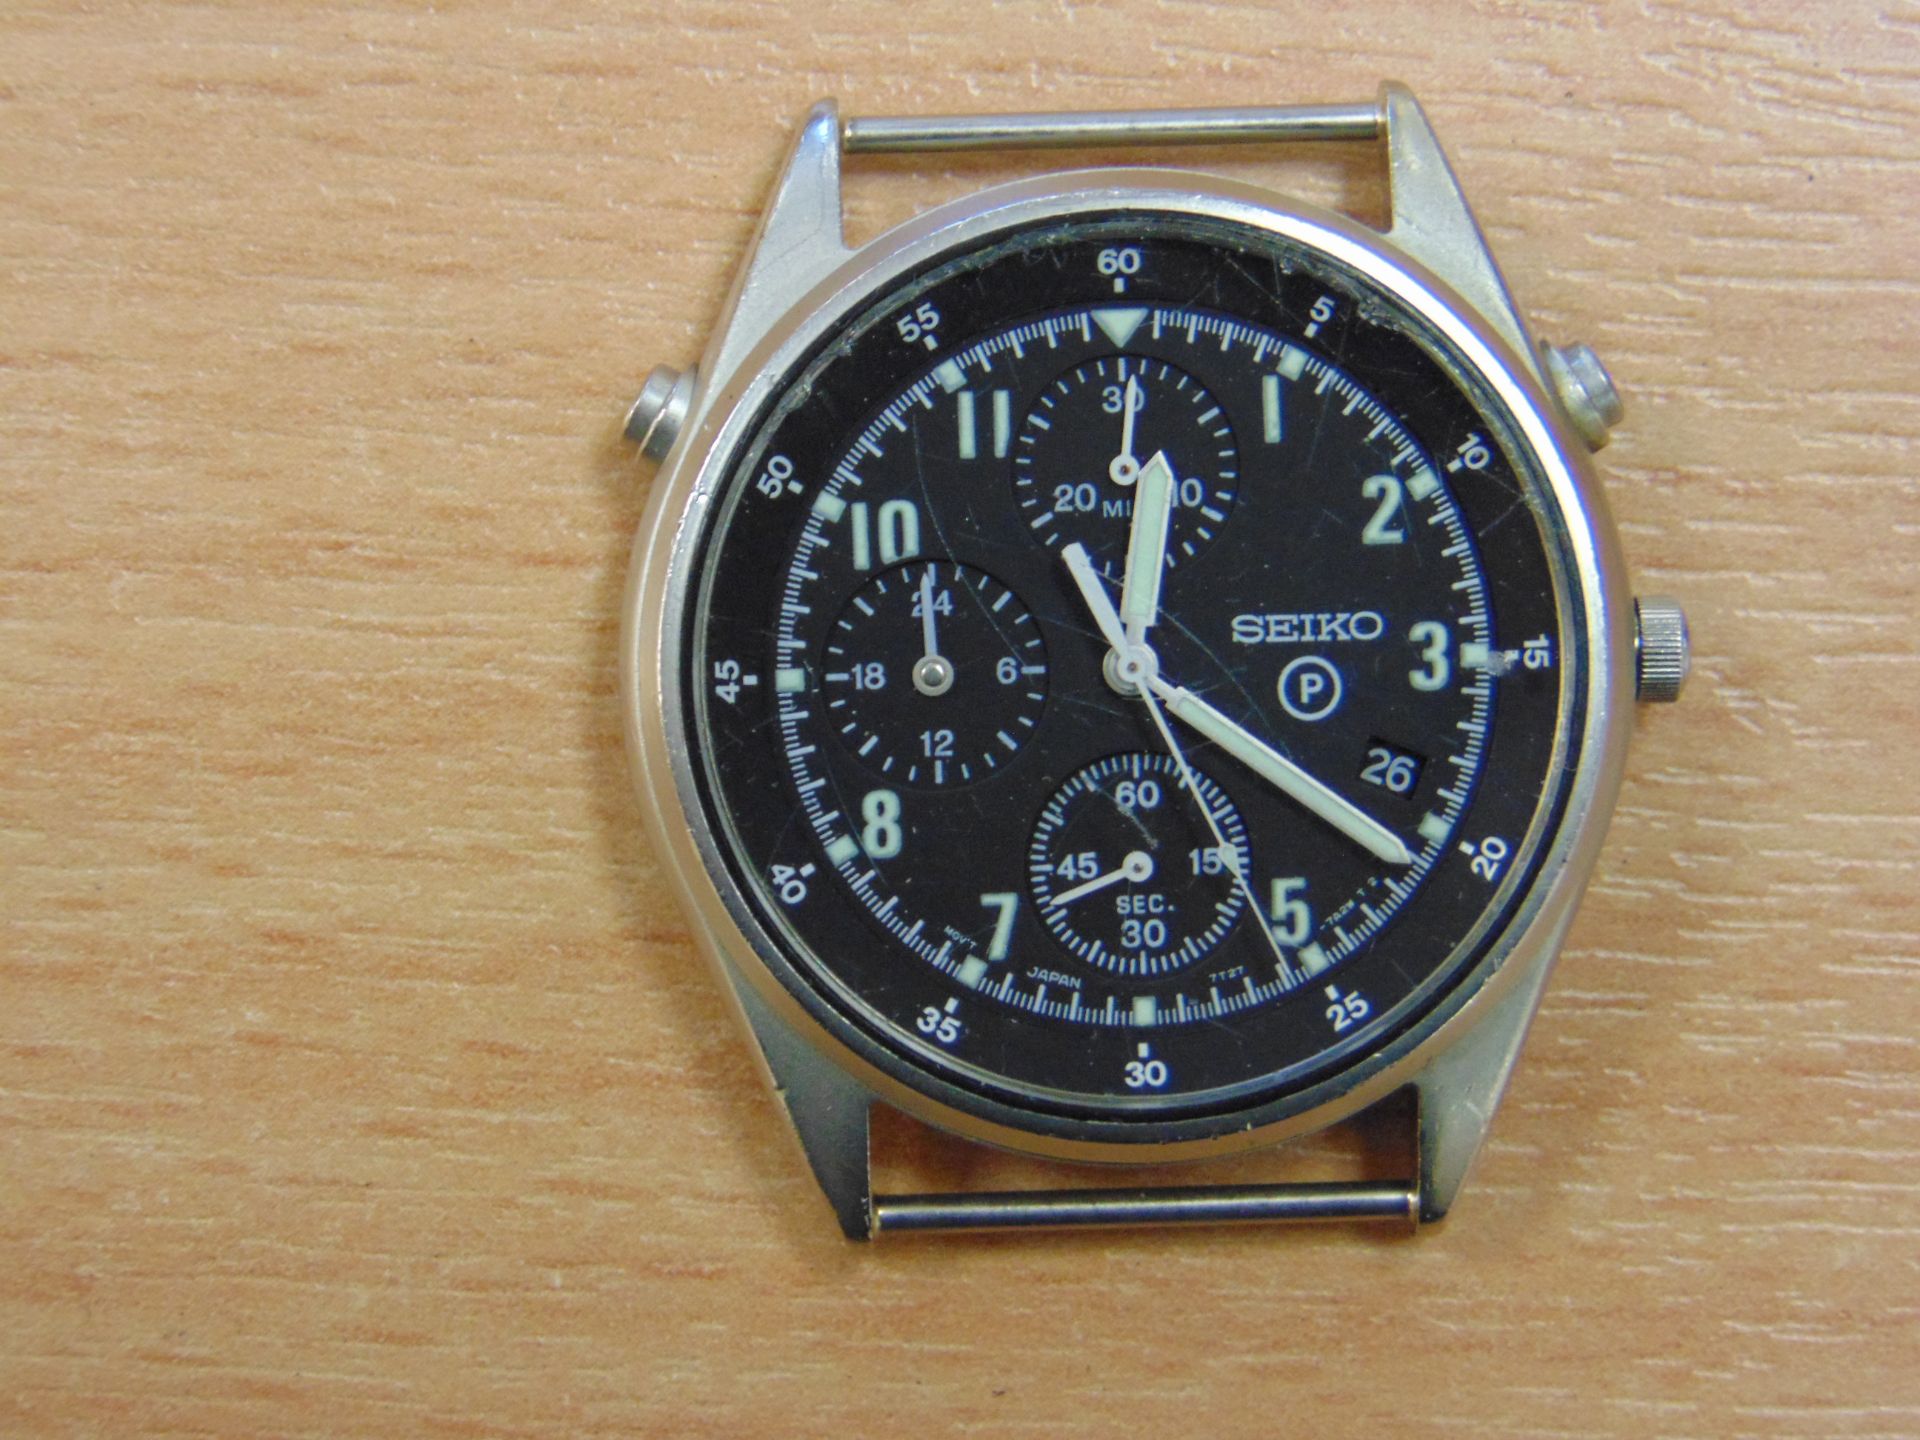 SEIKO RAF ISSUE PILOTS CHRONO GEN 2 NATO MARKS DATED 1994 - Image 3 of 8